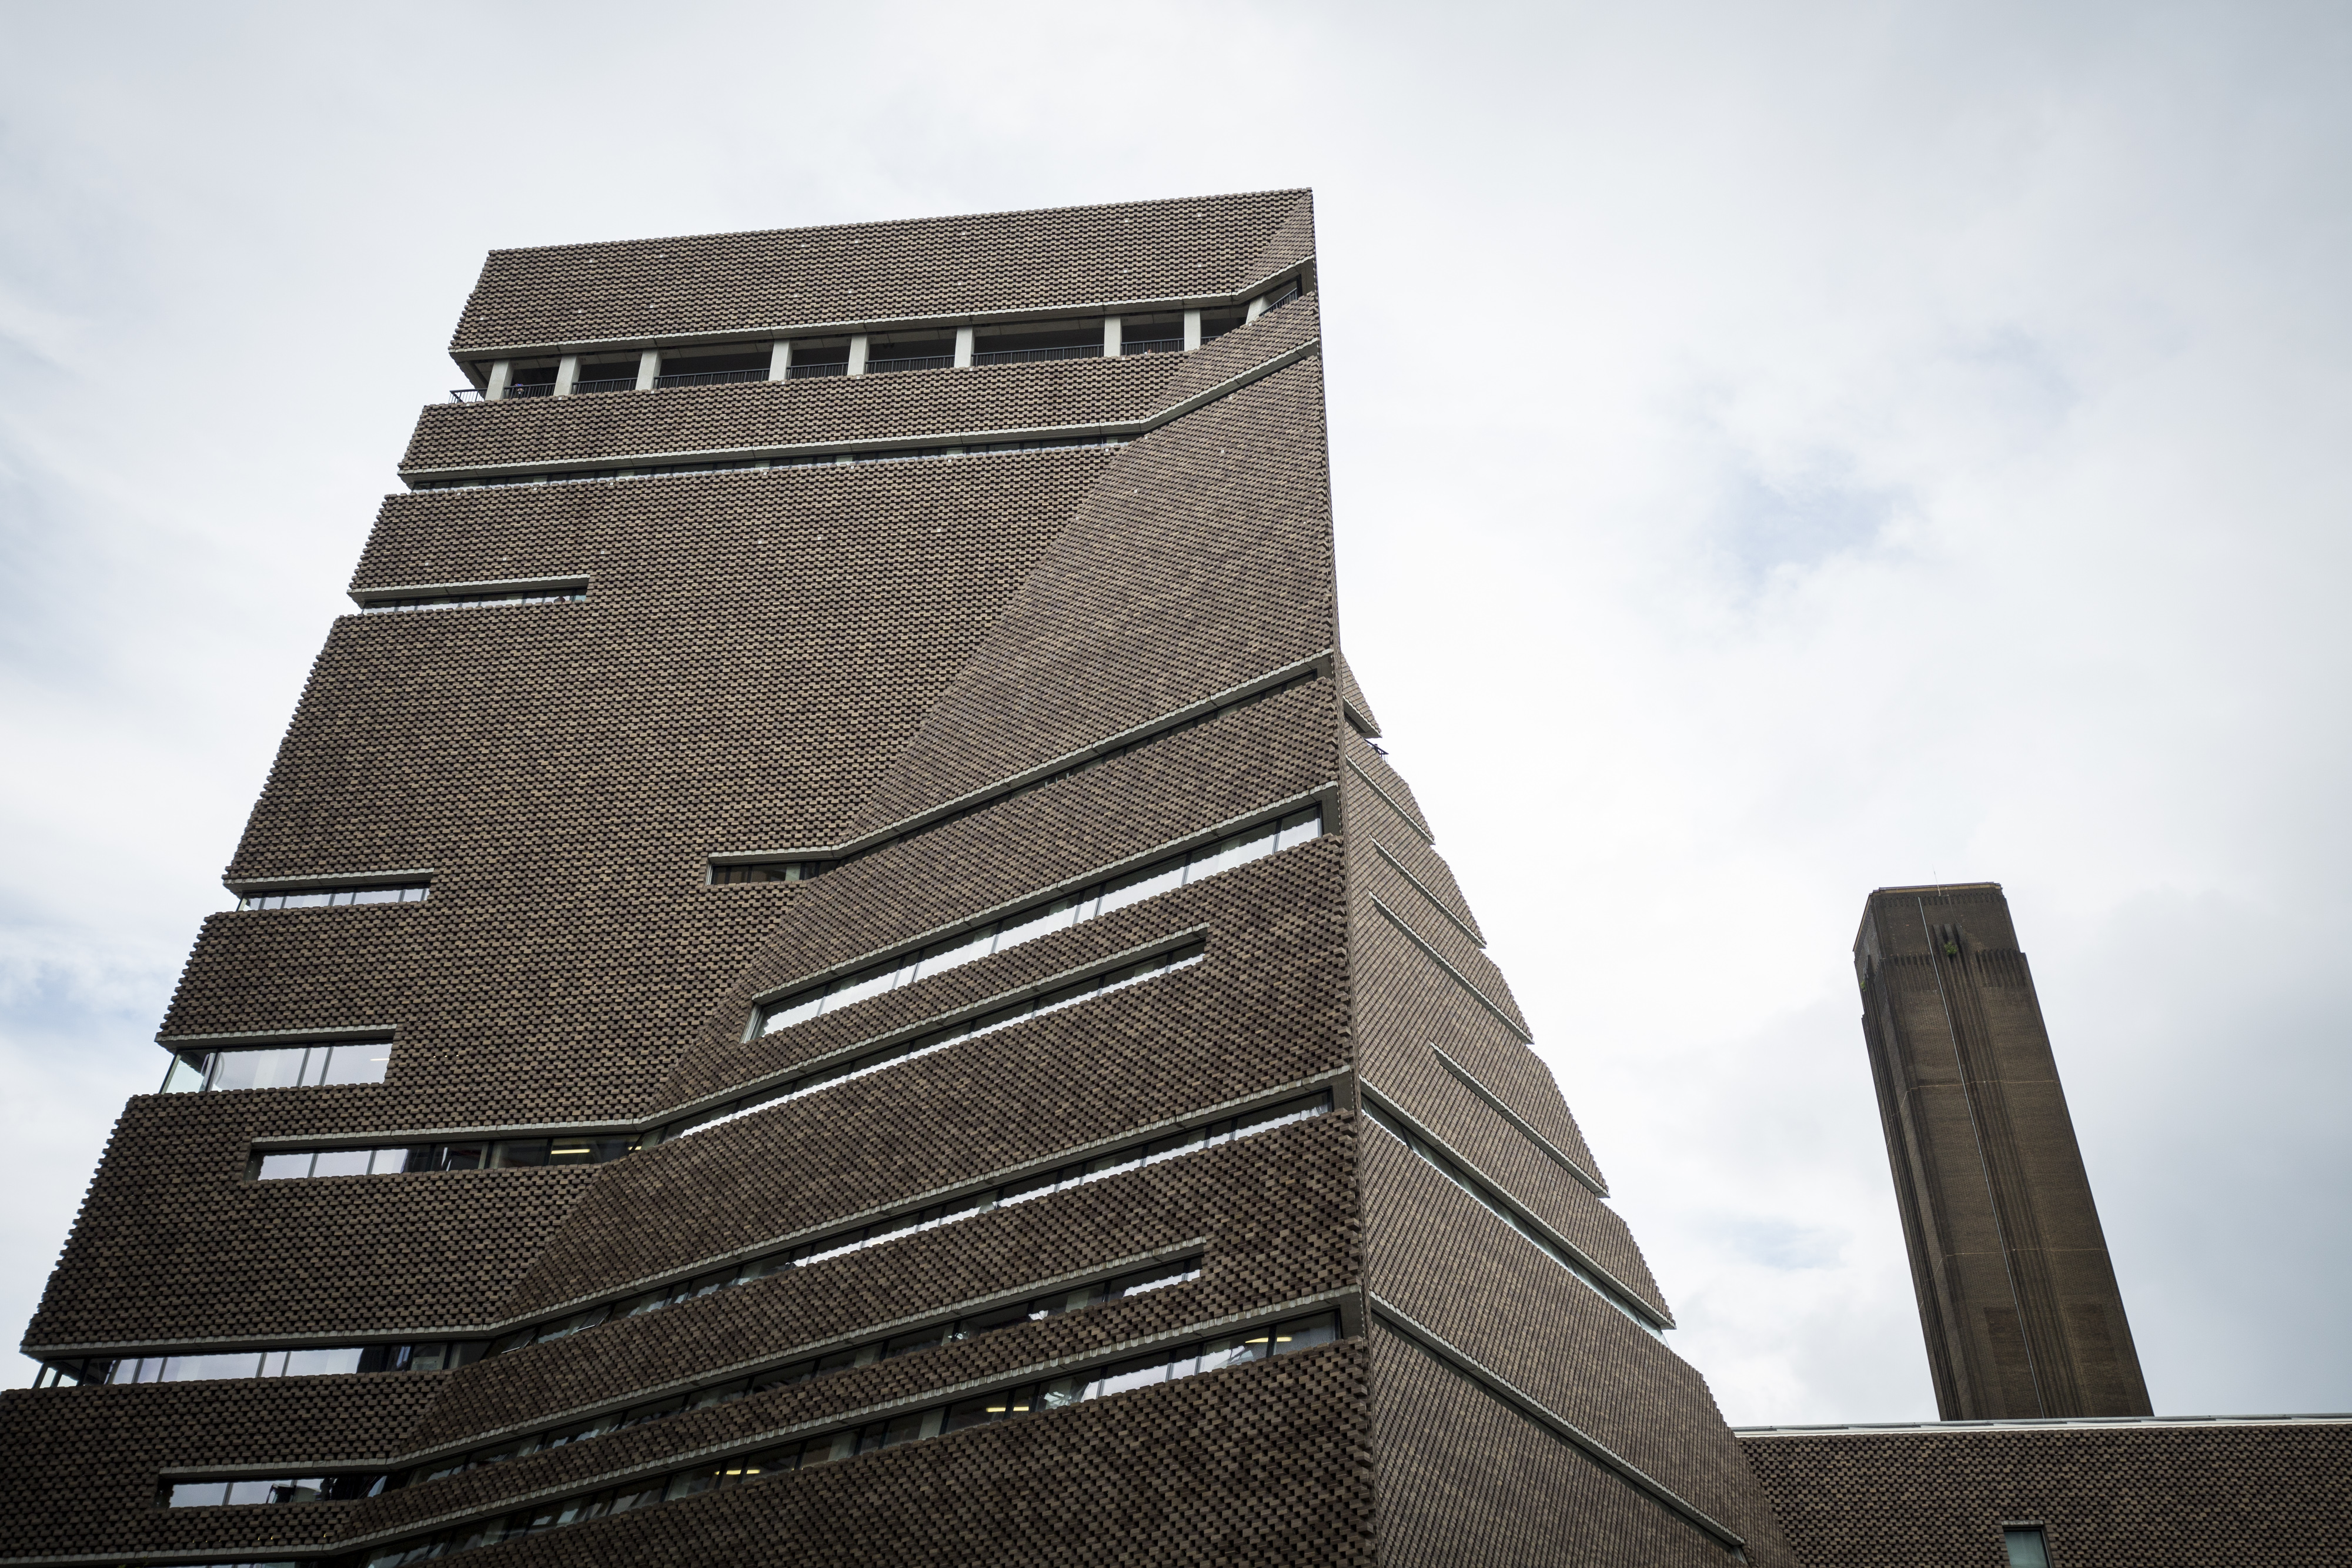 The Tate Modern's new Switch House building by architects Herzog &amp; de Meuron on June 14, 2016 in London. (Jack Taylor—Getty Images)